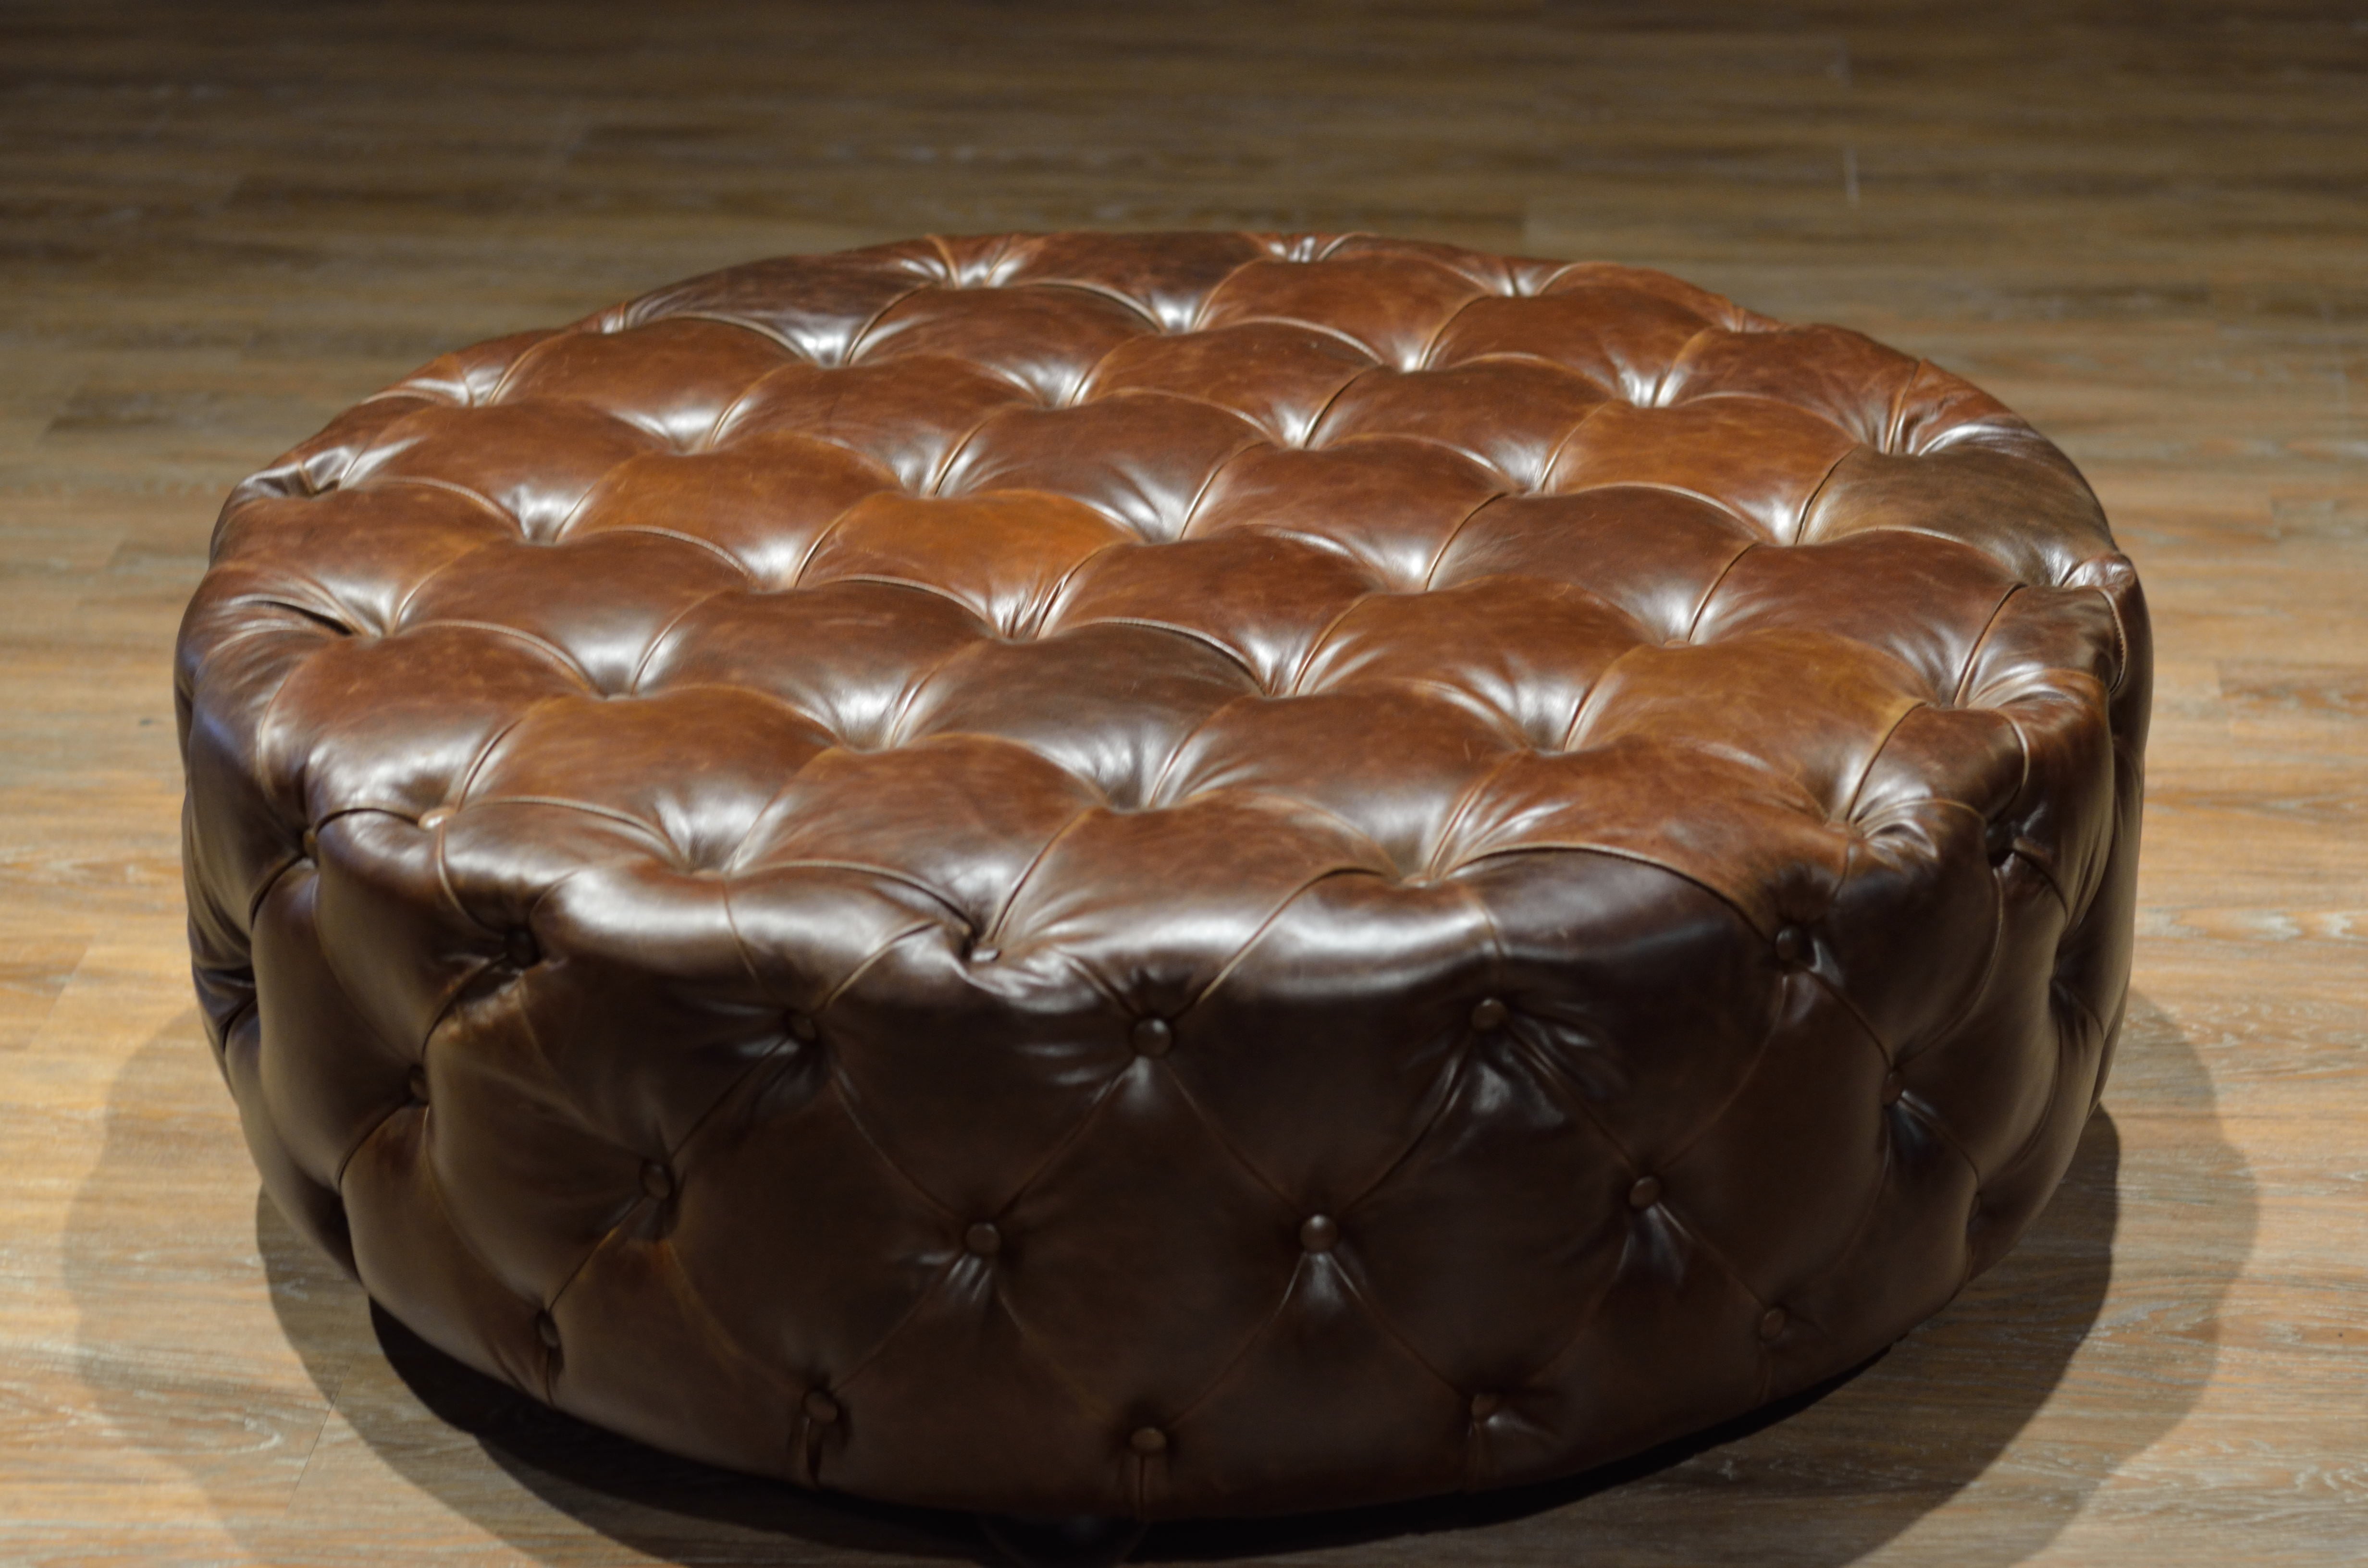 ROYAL DECADENCE ROUND TUFTED LEATHER OTTOMAN